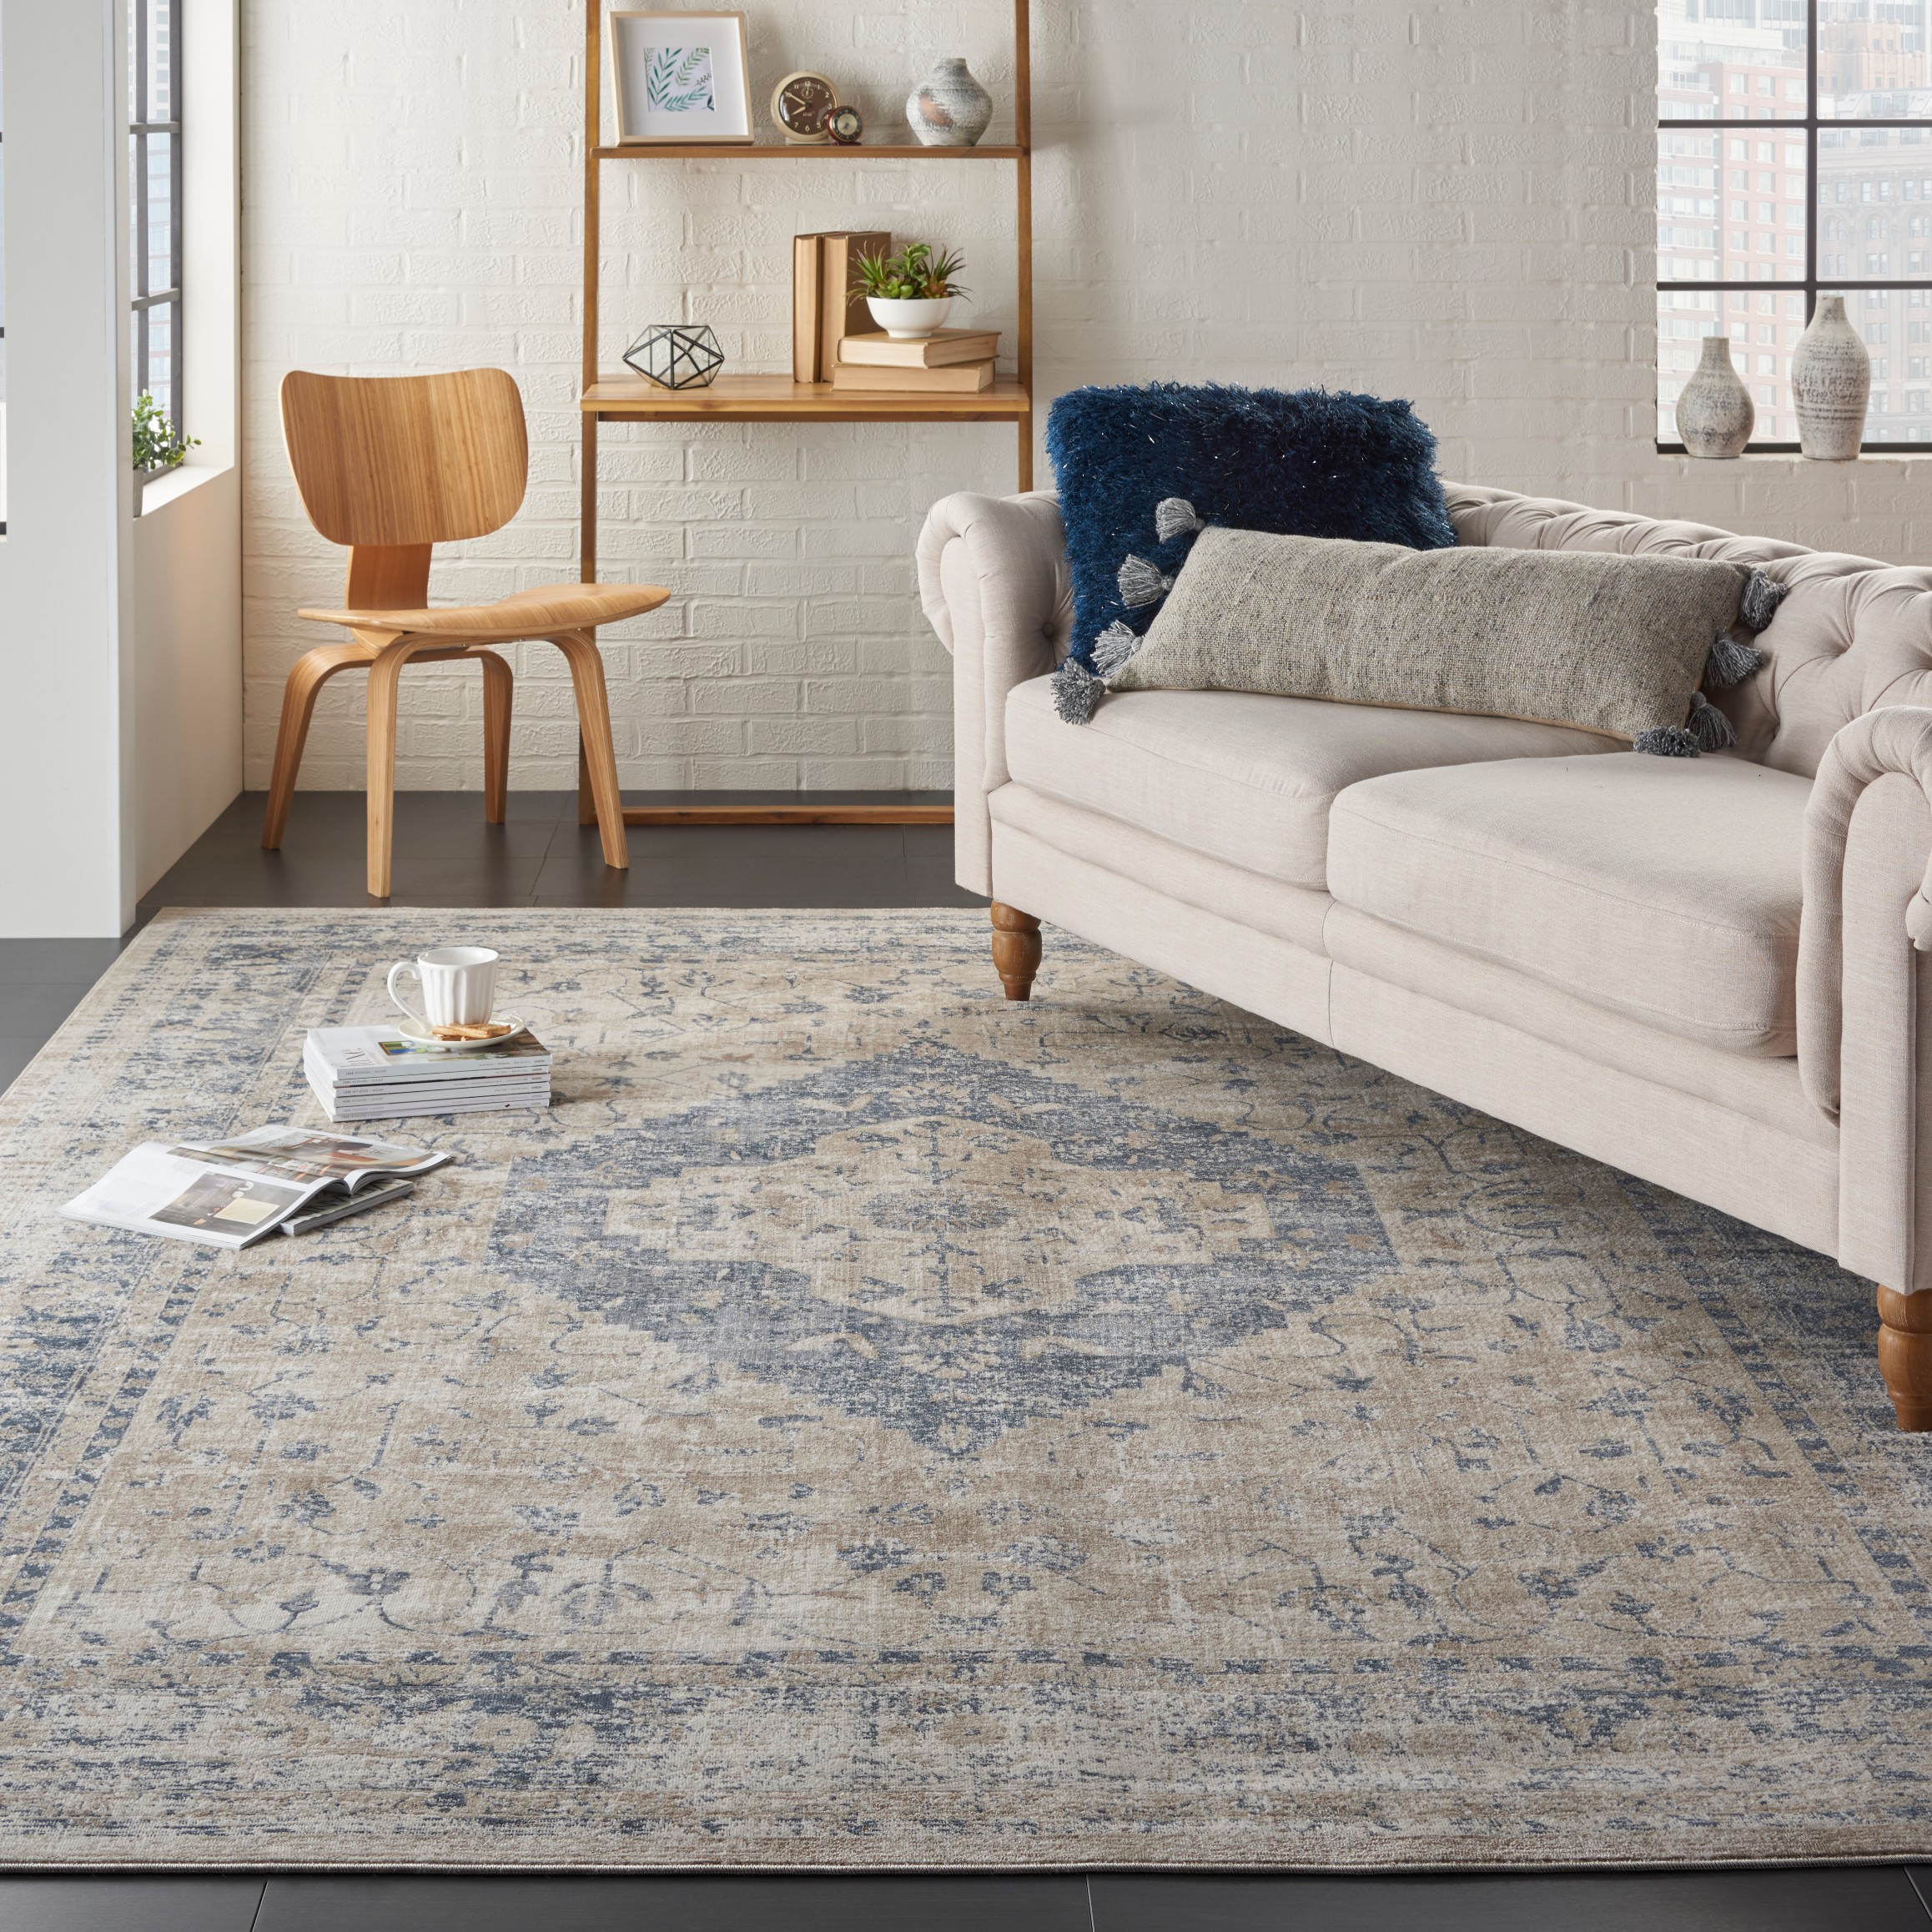 Malta MAI11 Ivory Blue Rugs - Buy MAI11 Ivory Blue Rugs Online from Rugs Direct